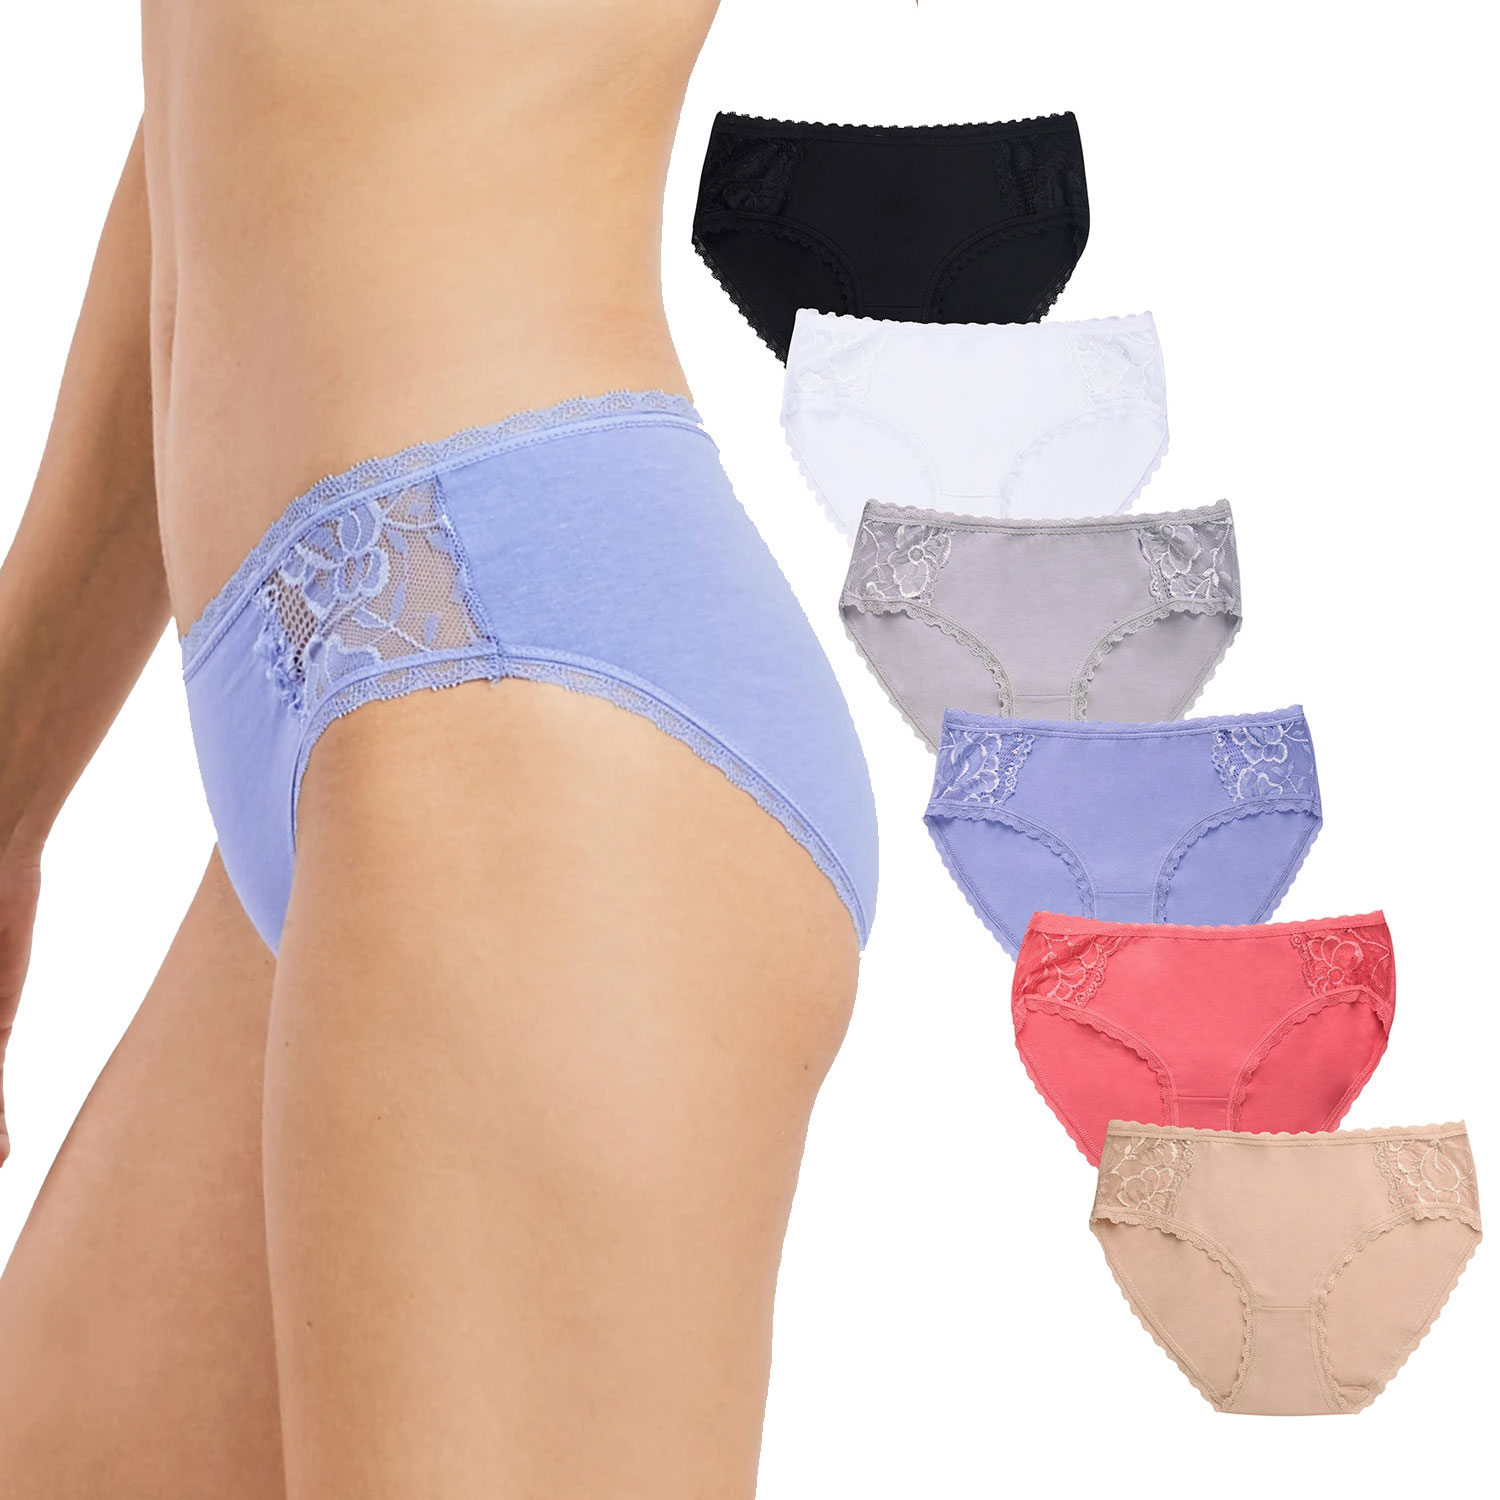 6 or 12-Pack Ladies Cotton Bikini Panty Extended